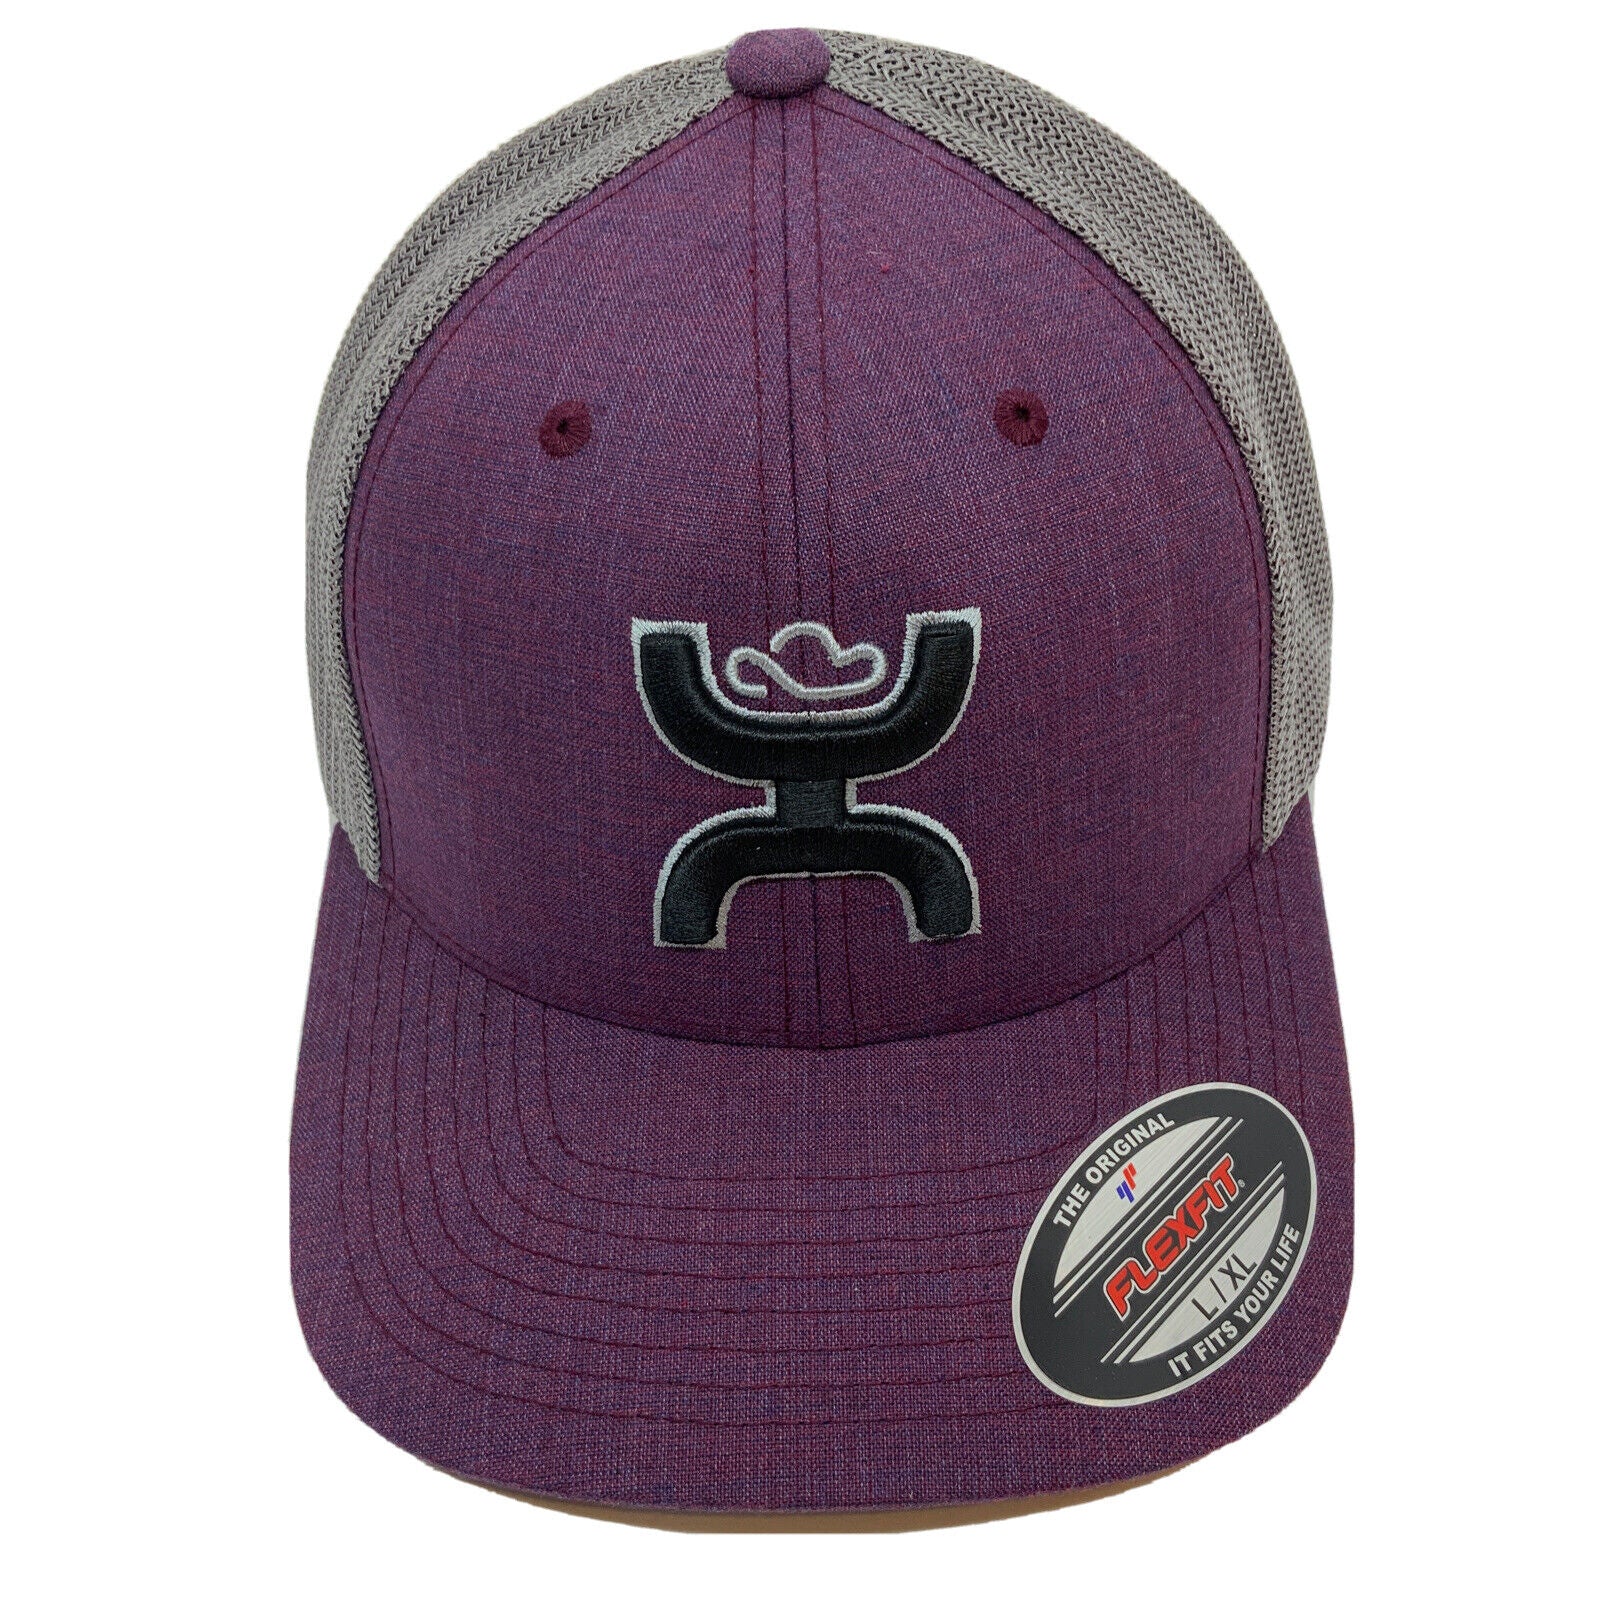 Hooey Baseball Cayman Hat Flexfit PLGY Mesh Southern Purple Boutique 221102 Gray Girls With 